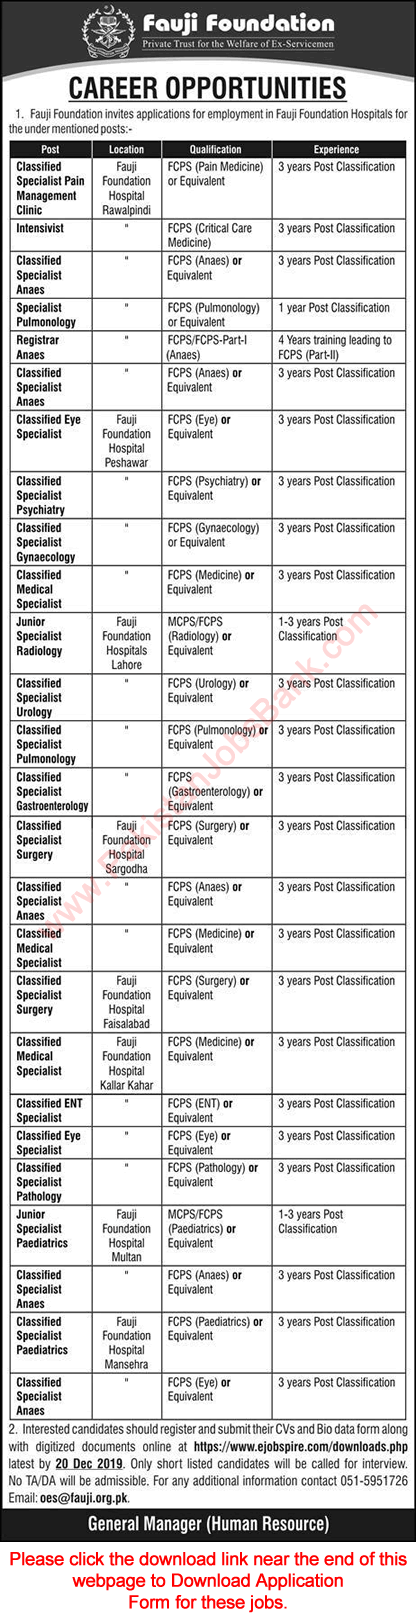 Fauji Foundation Hospitals Jobs 2019 December Application Form Specialist Doctors / Classified Latest